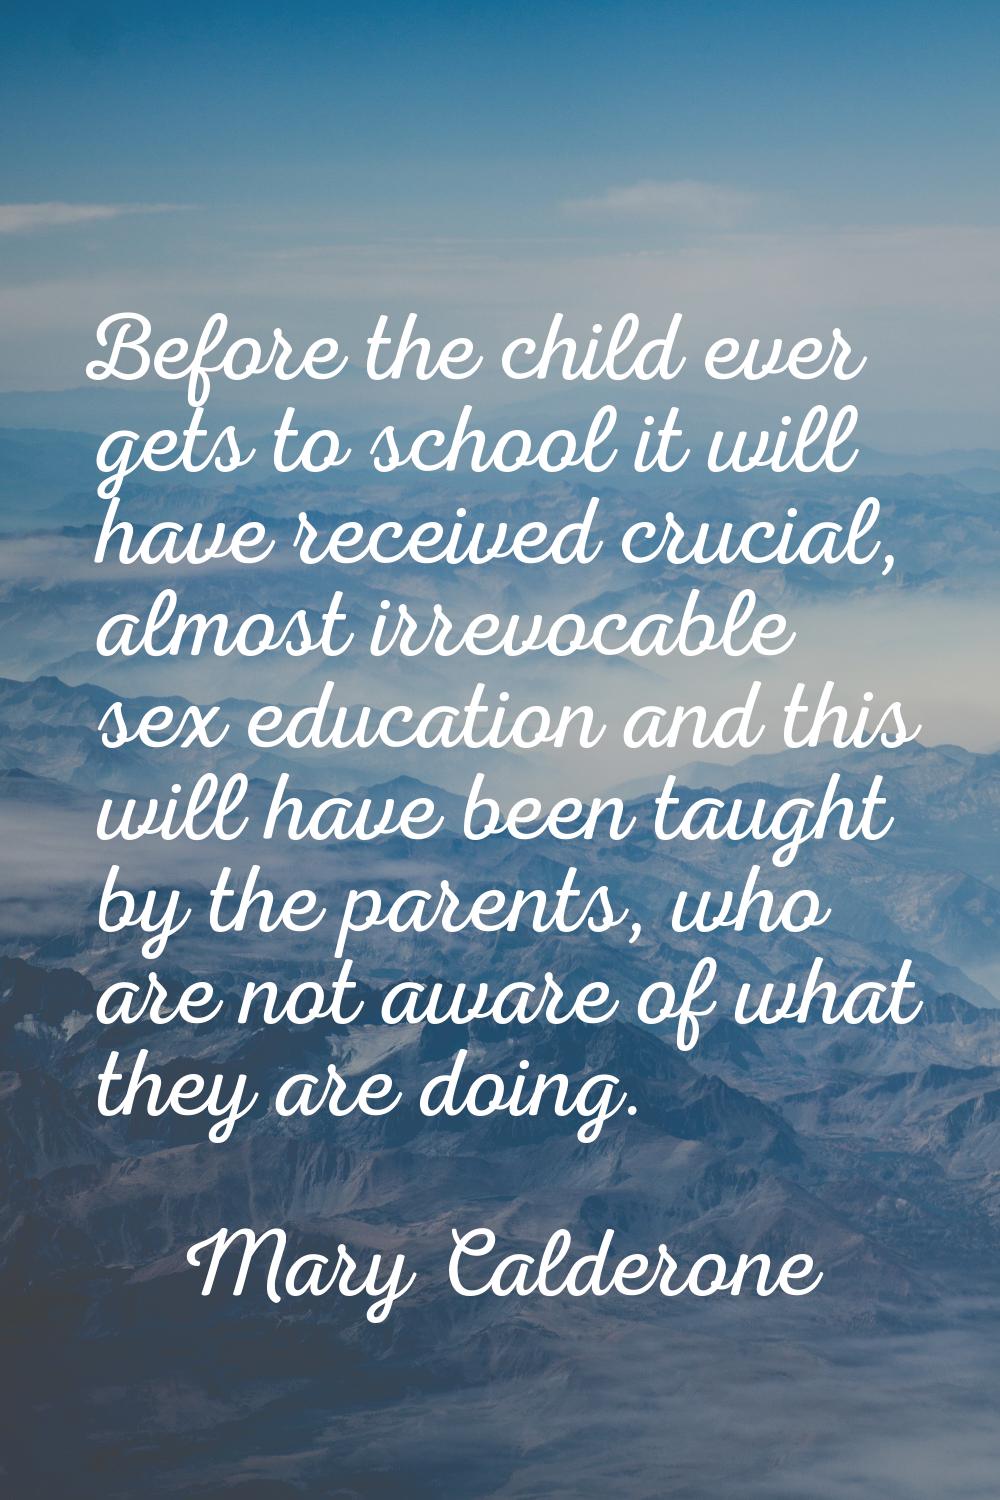 Before the child ever gets to school it will have received crucial, almost irrevocable sex educatio